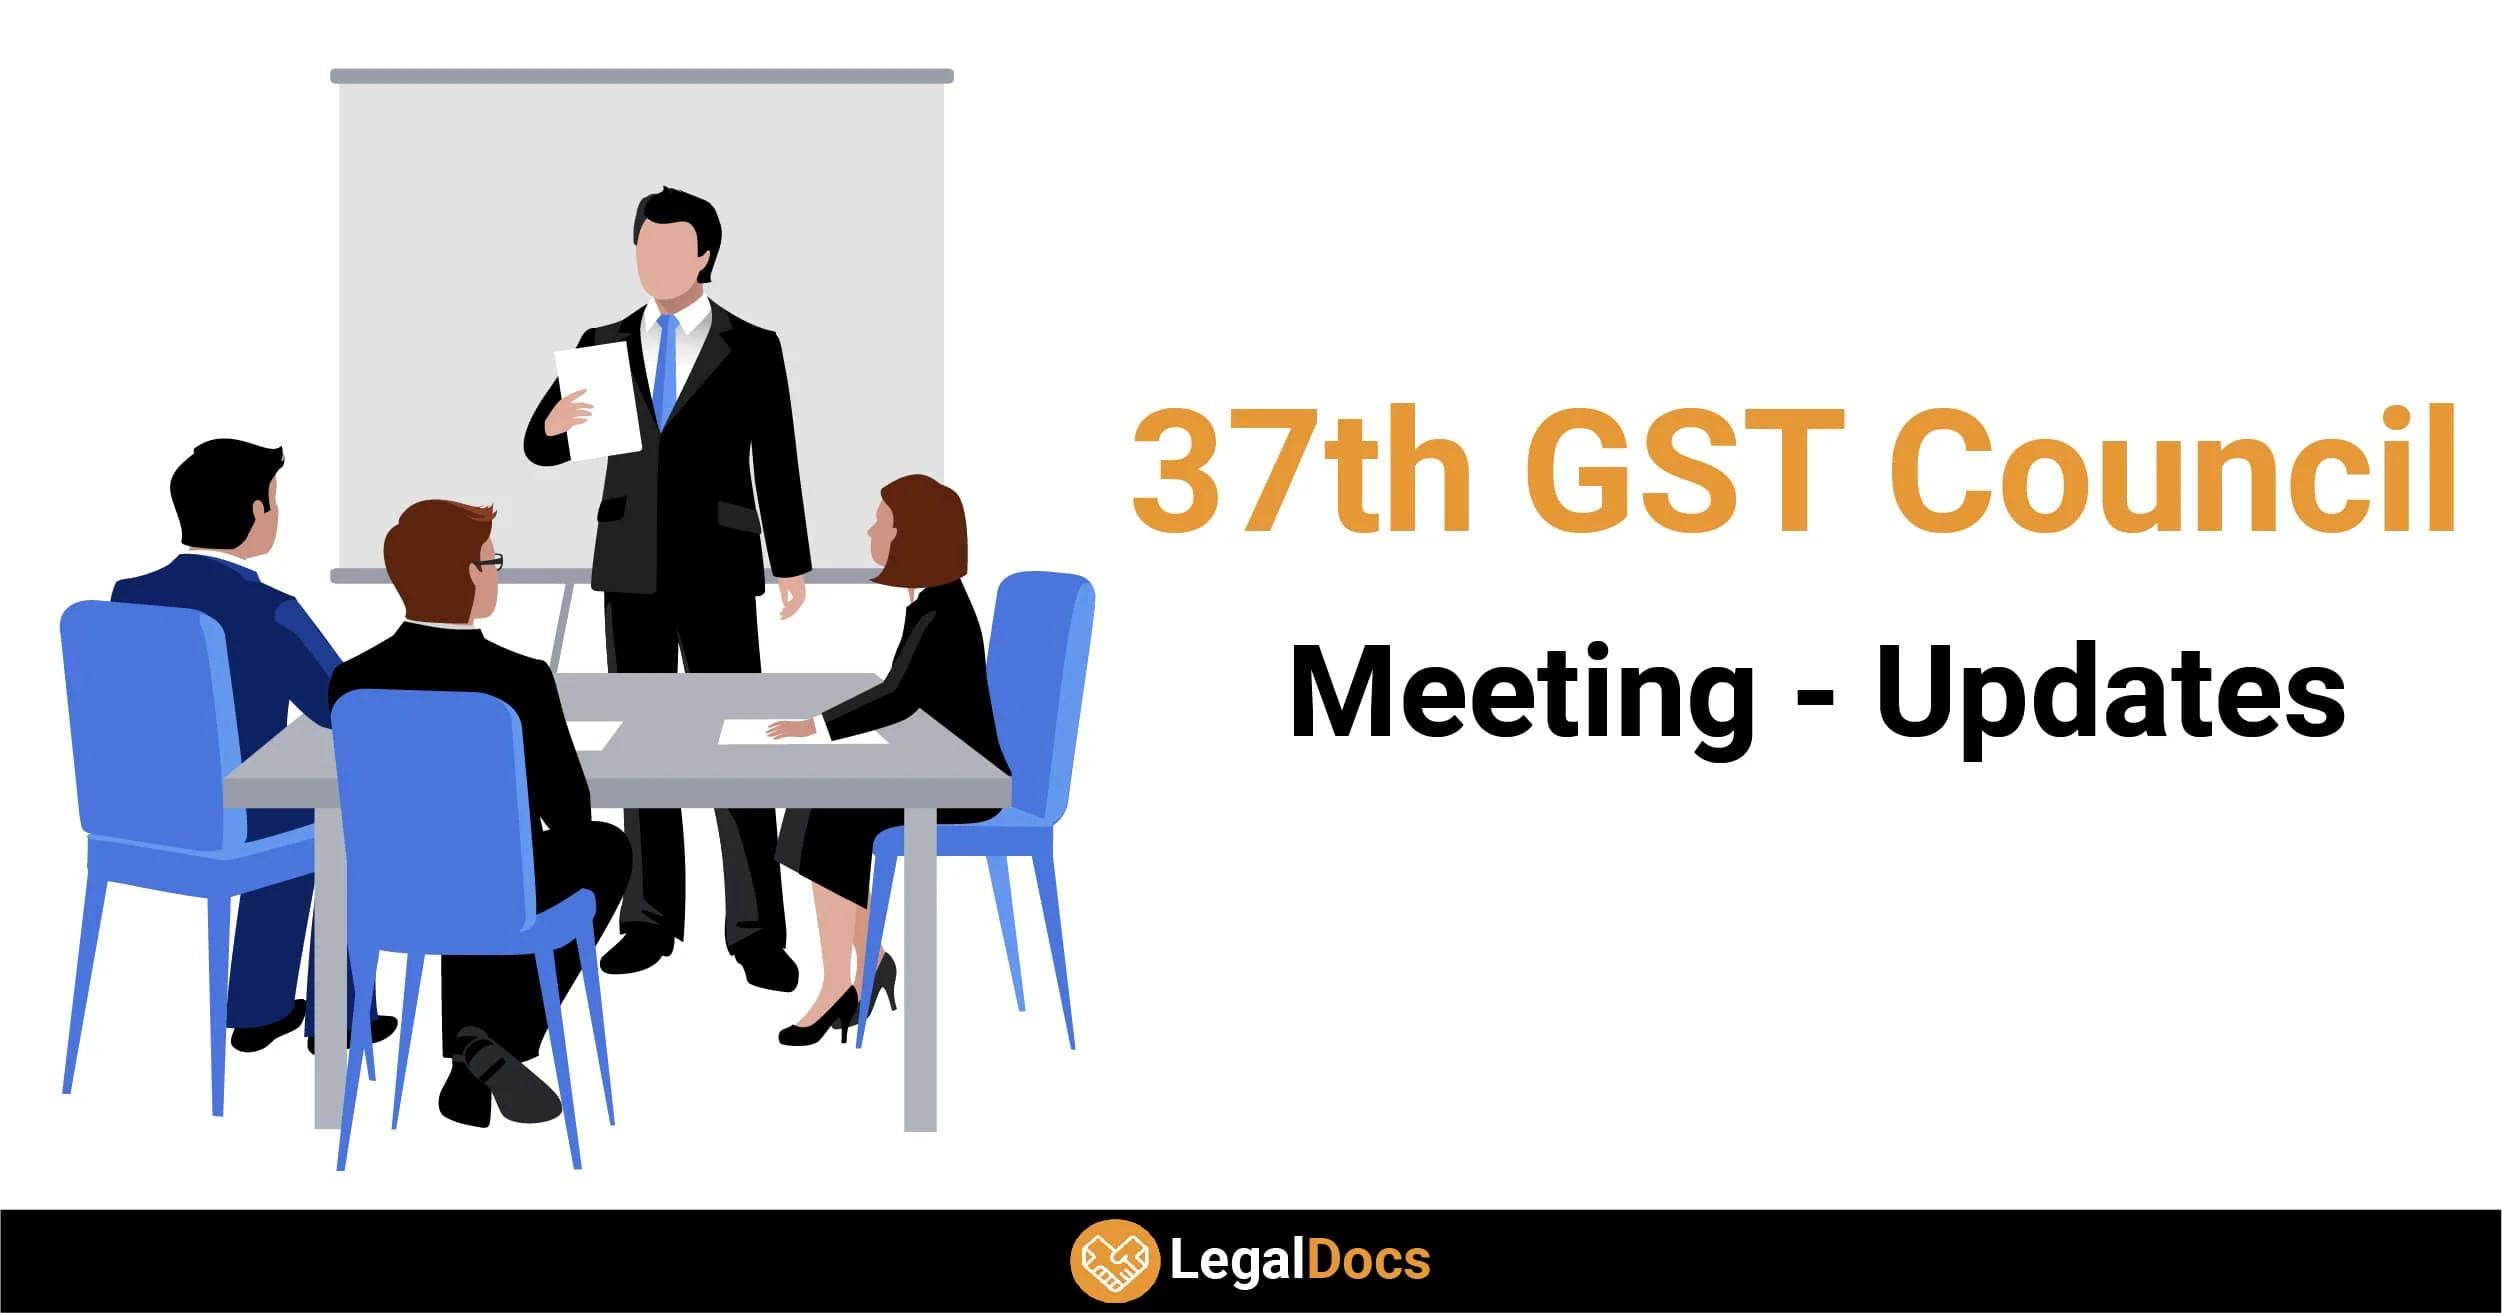 37th GST Council Meeting - News and Updates - LegalDocs